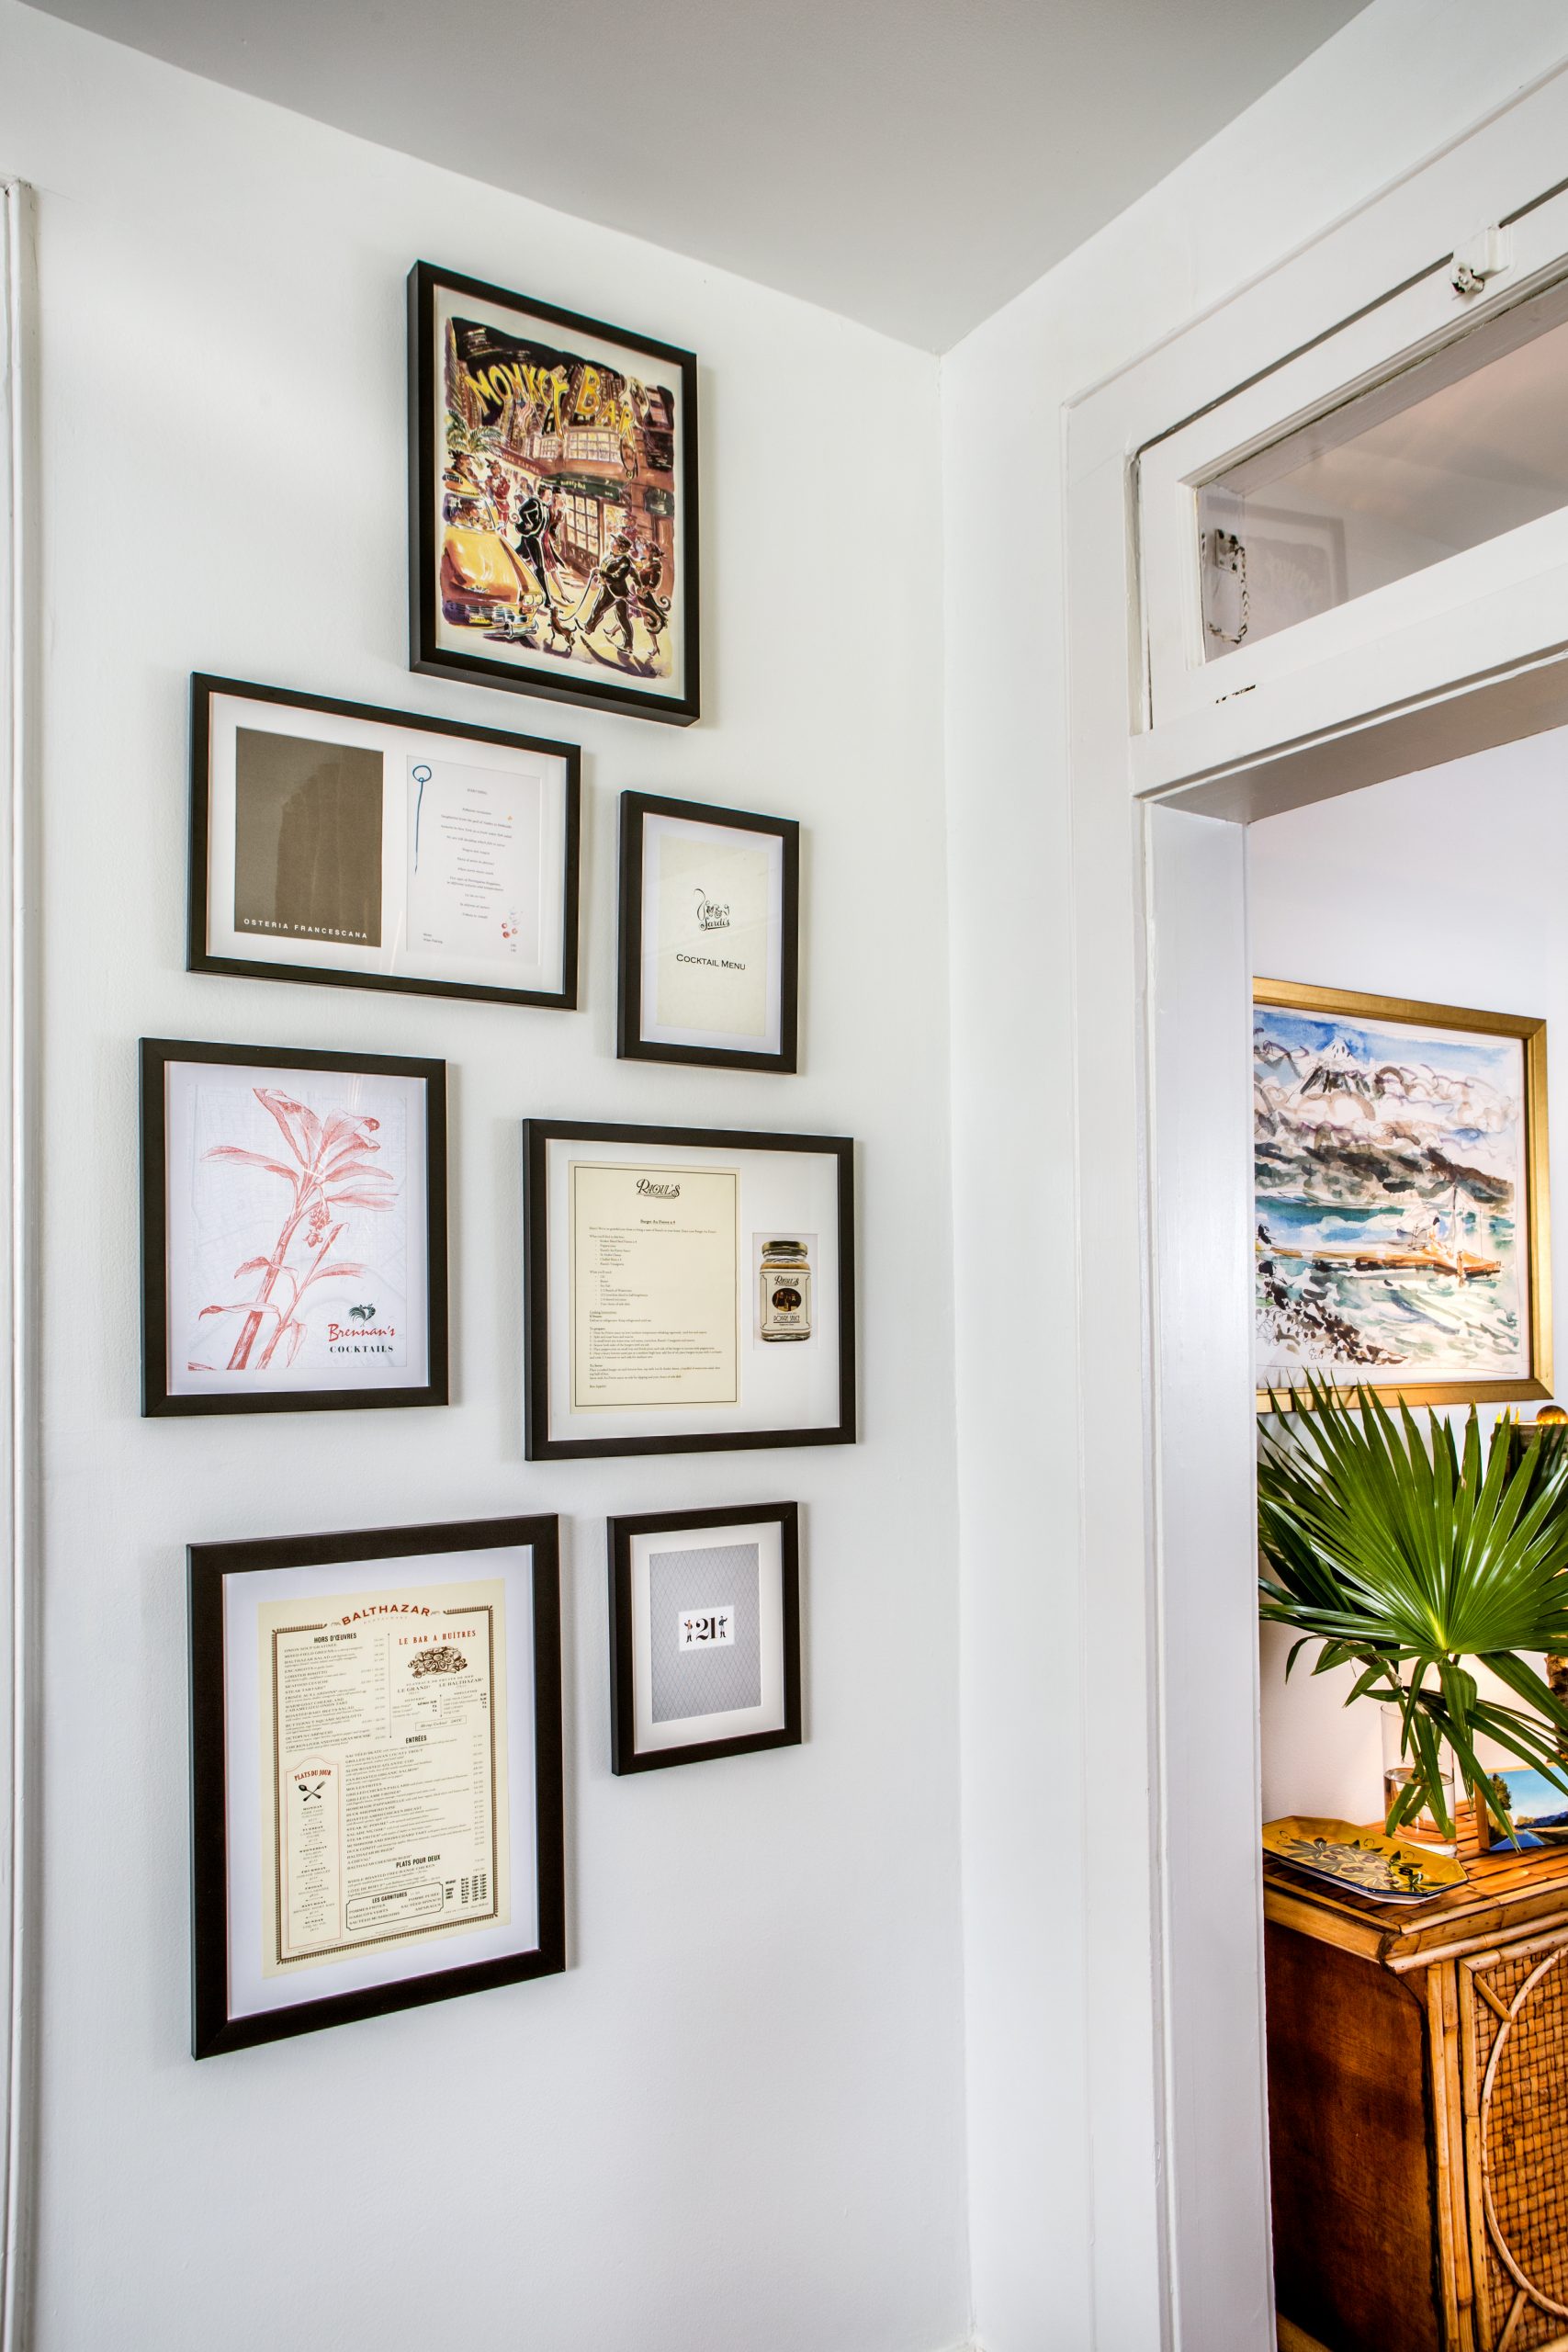 Framed menus, mostly from Mary Bond’s years in New York, flank the cased opening in the dining area. The collection was inspired by close family friends, the Kiblers, and is hung strategically to spark conversation about cooking and travel. 